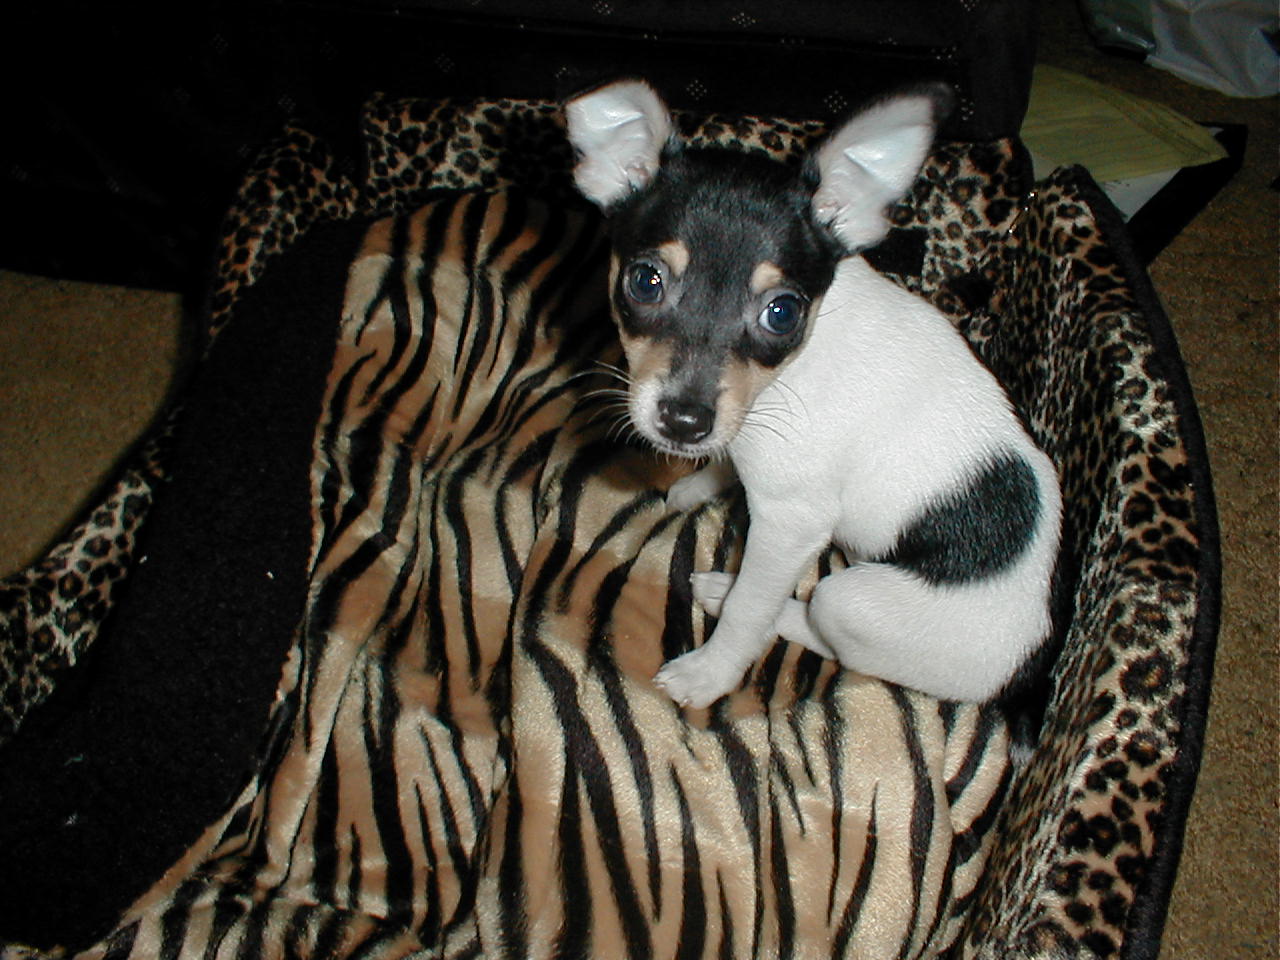 Where can you find Toy Fox Terrier puppies for sale?